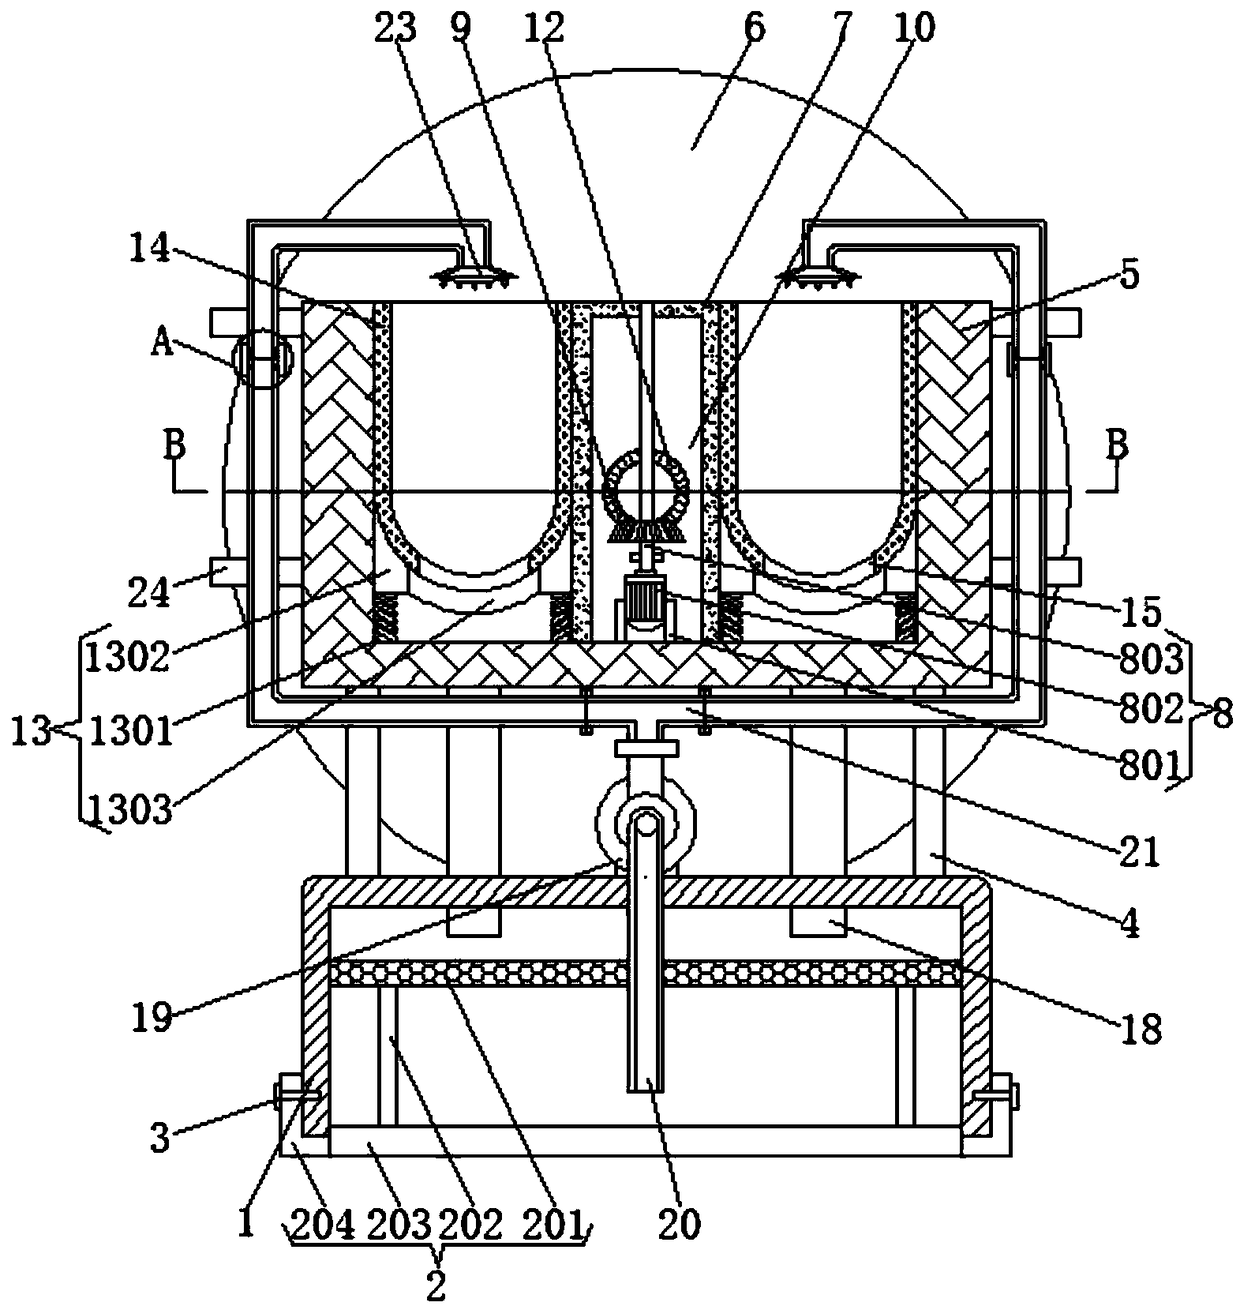 Circulating clam cleaning device based on power shaking and combined washing